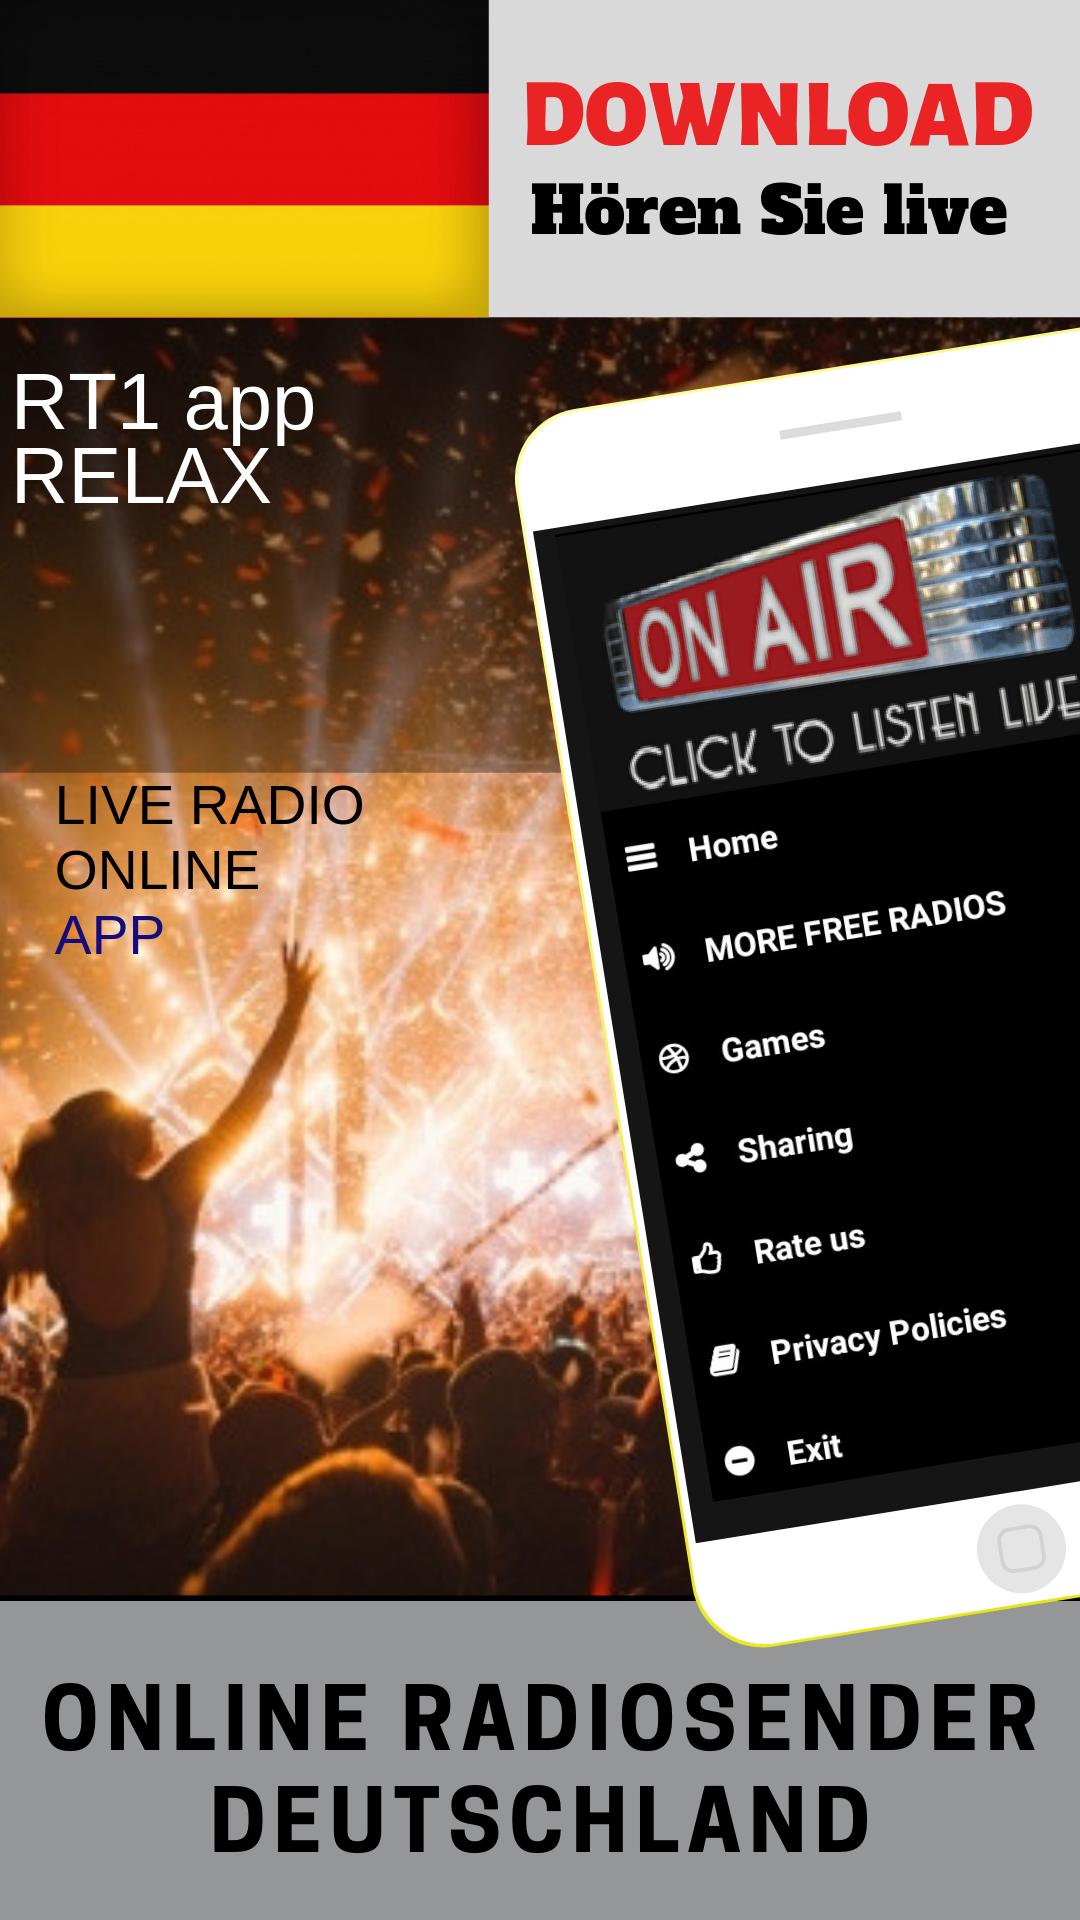 RT1 app RELAX for Android - APK Download